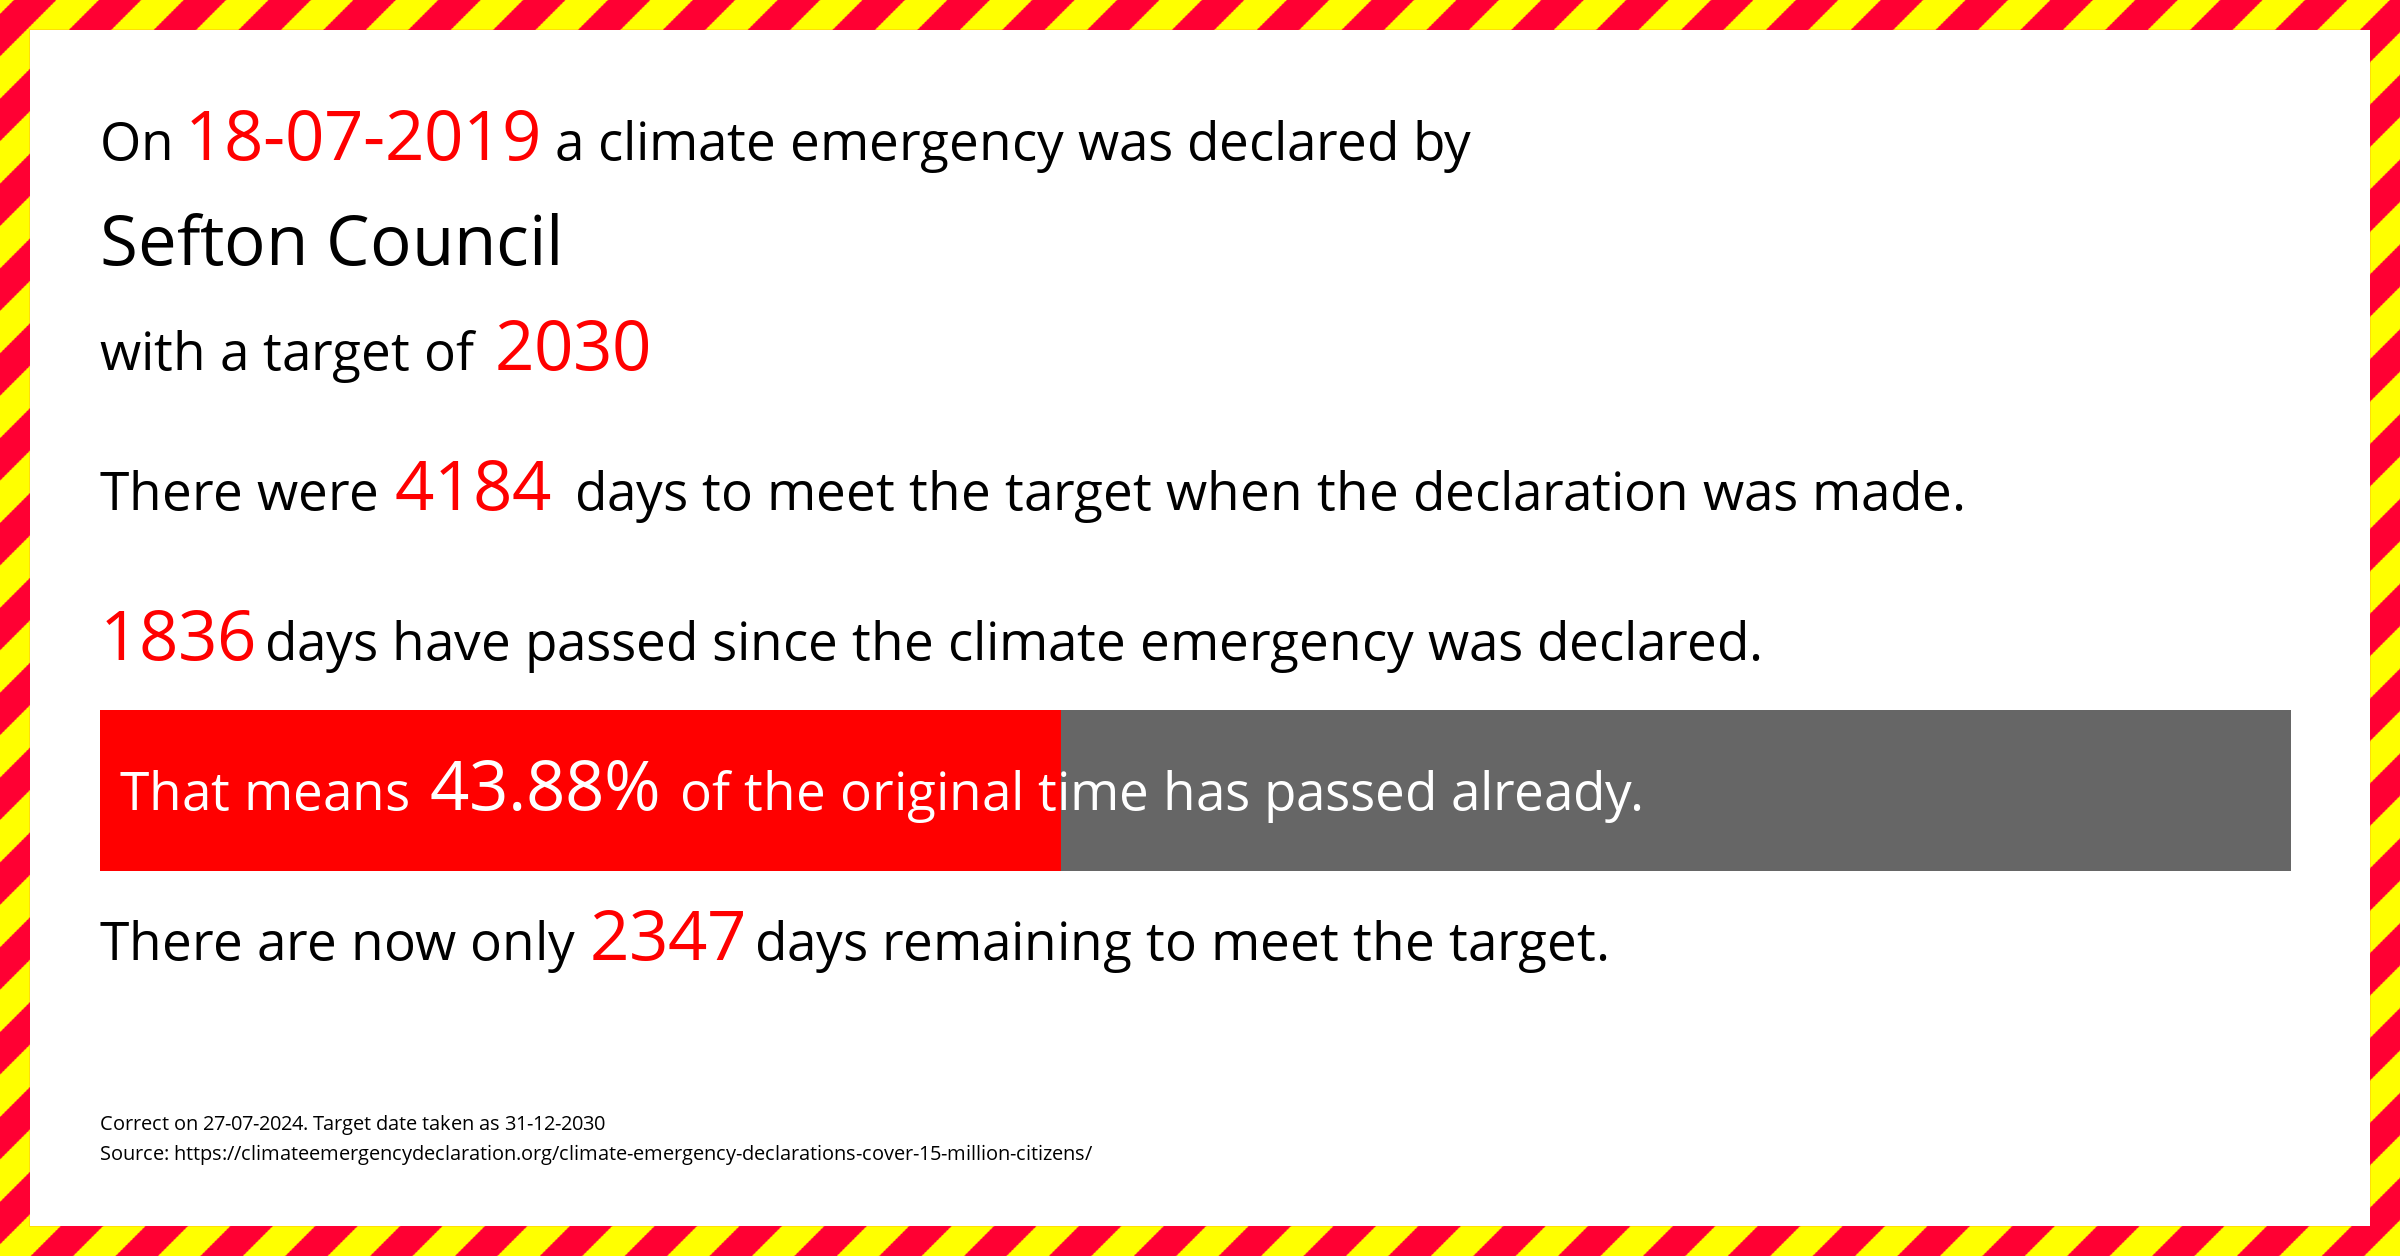 Sefton Council declared a Climate emergency on Thursday 18th July 2019, with a target of 2030.